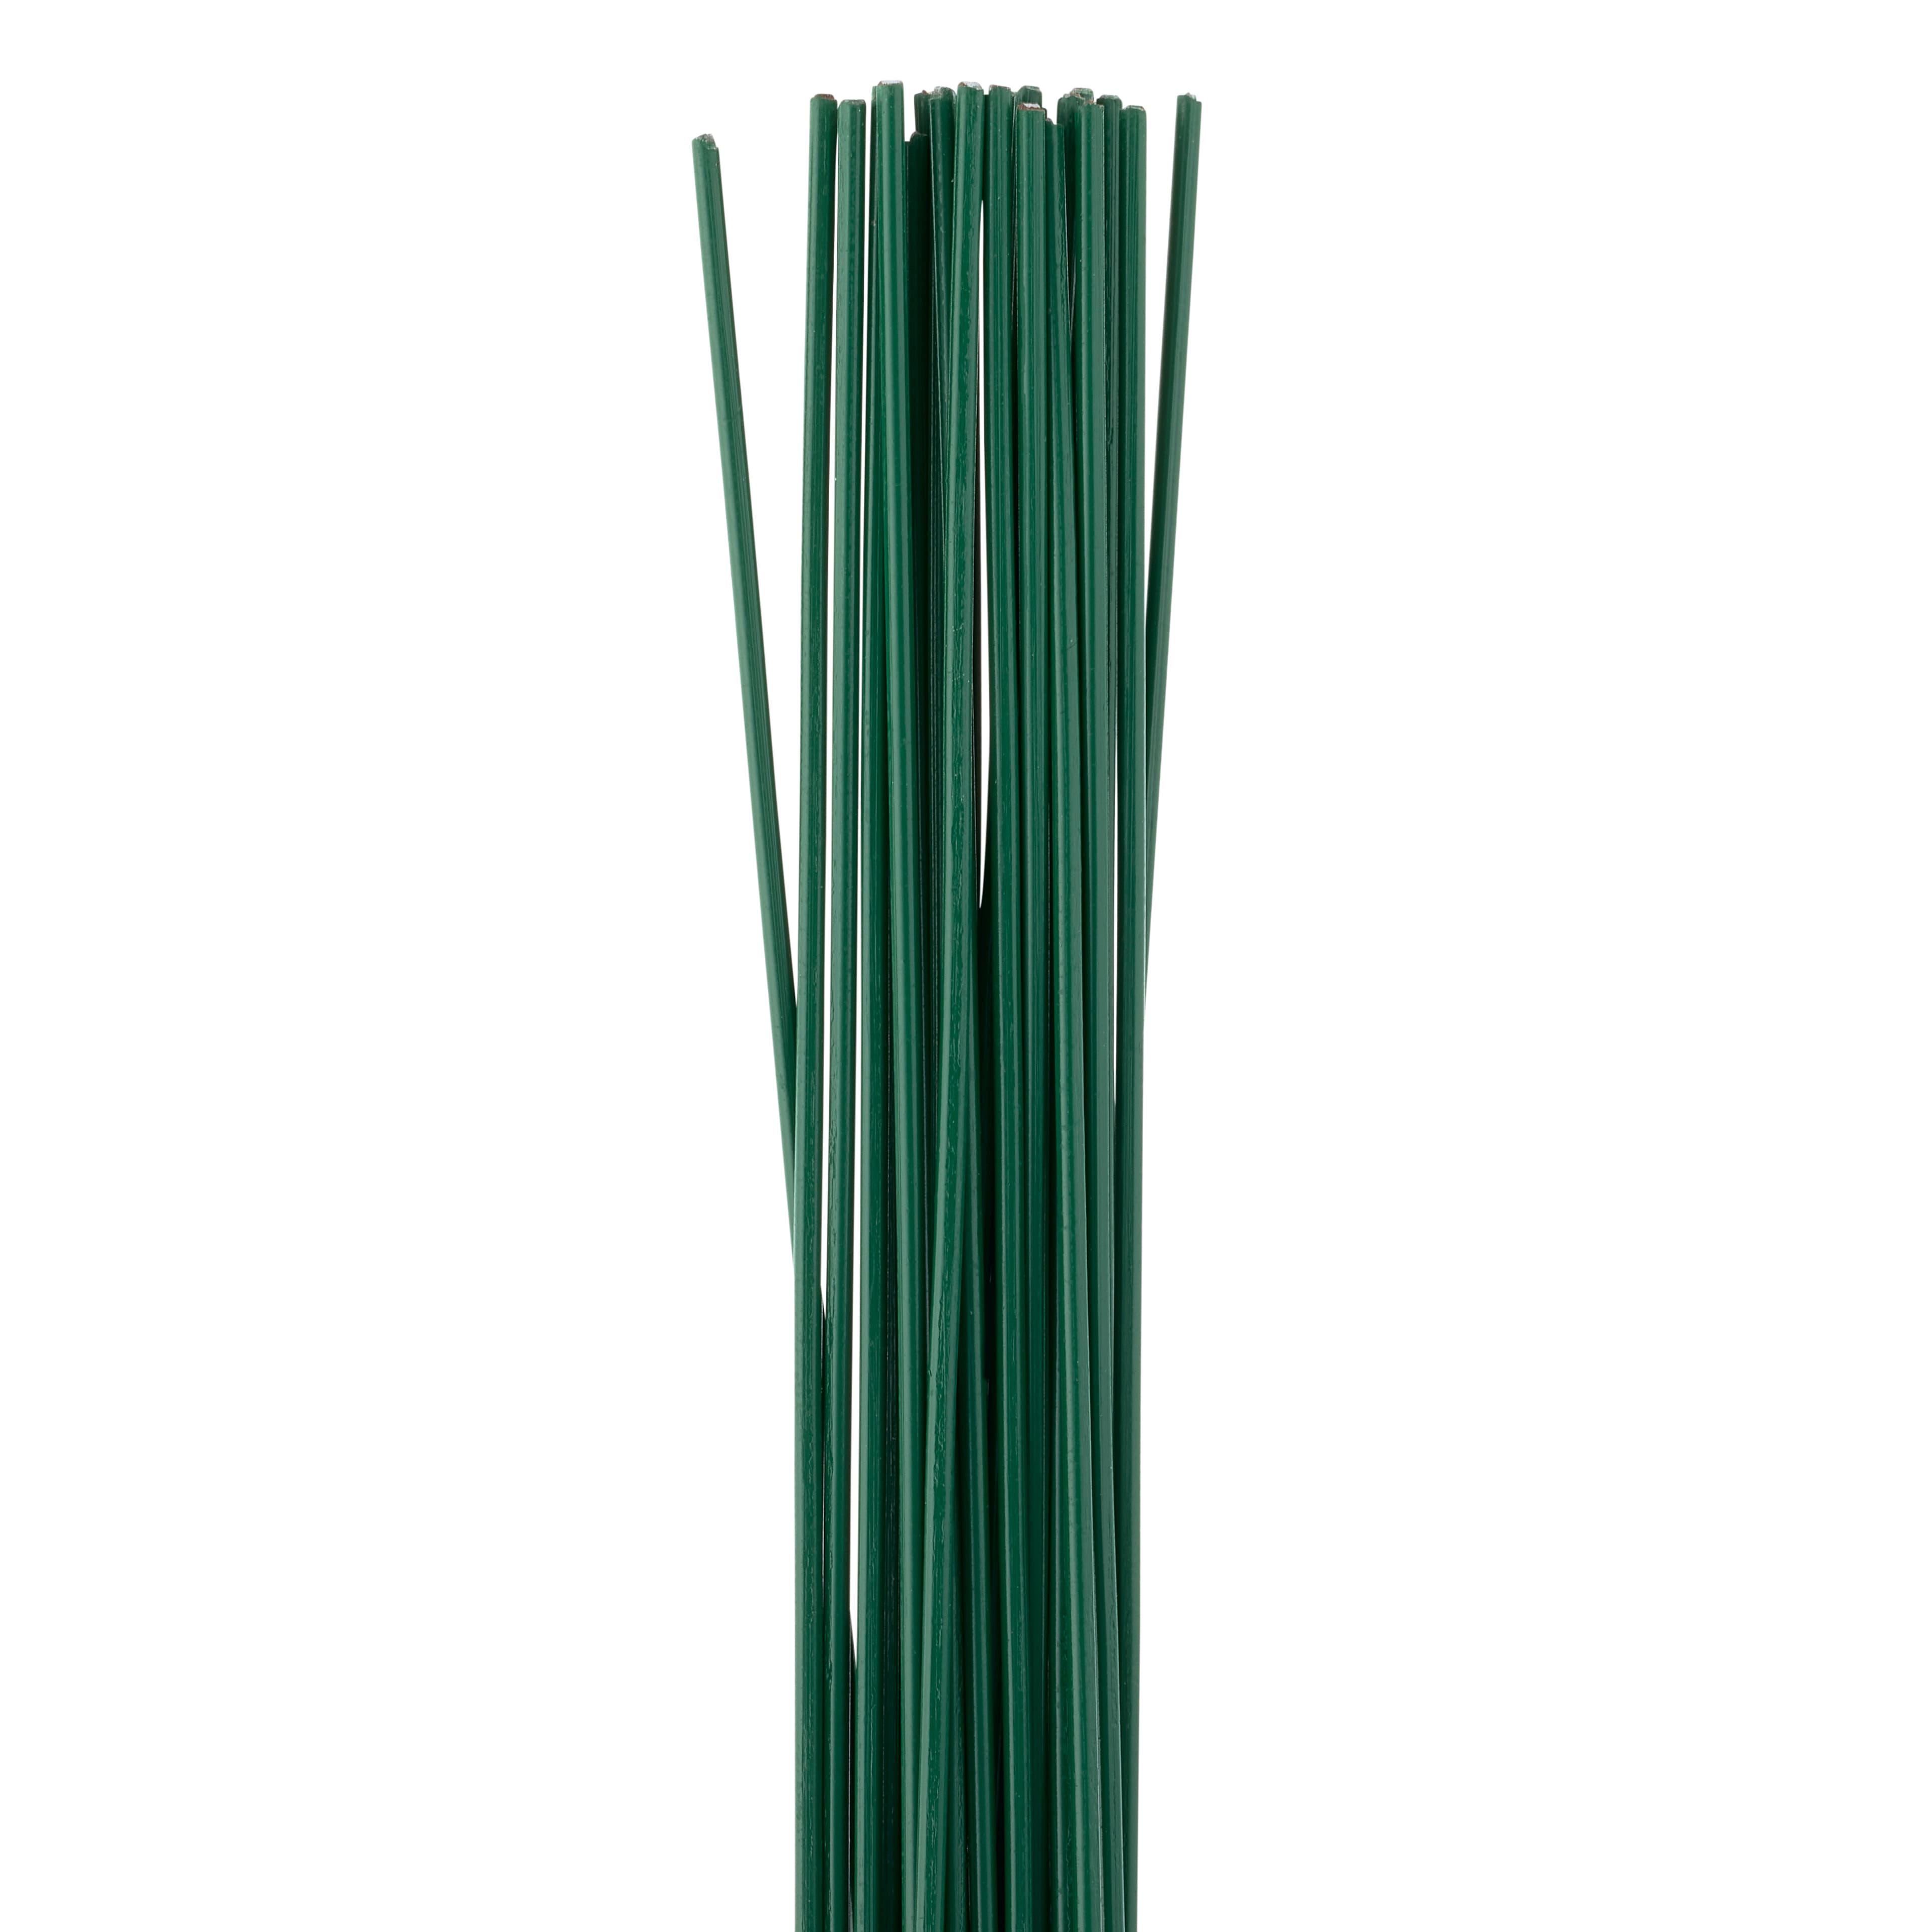 20 Guage Green Stem Wire 30pk by Bloom Room